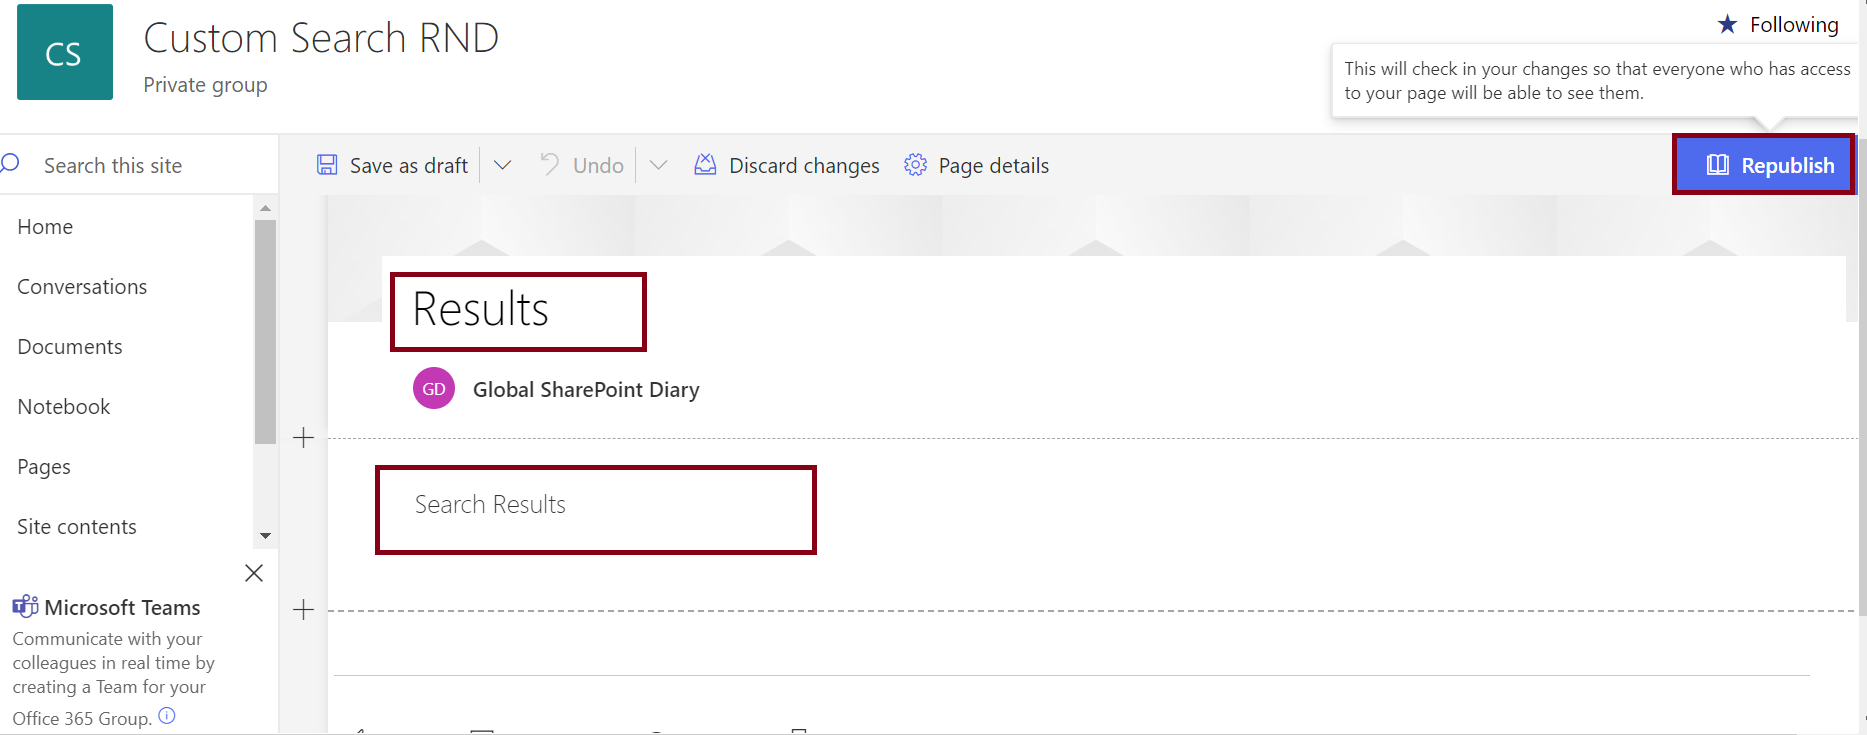 Steps to create a page in SharePoint Online - publish the page